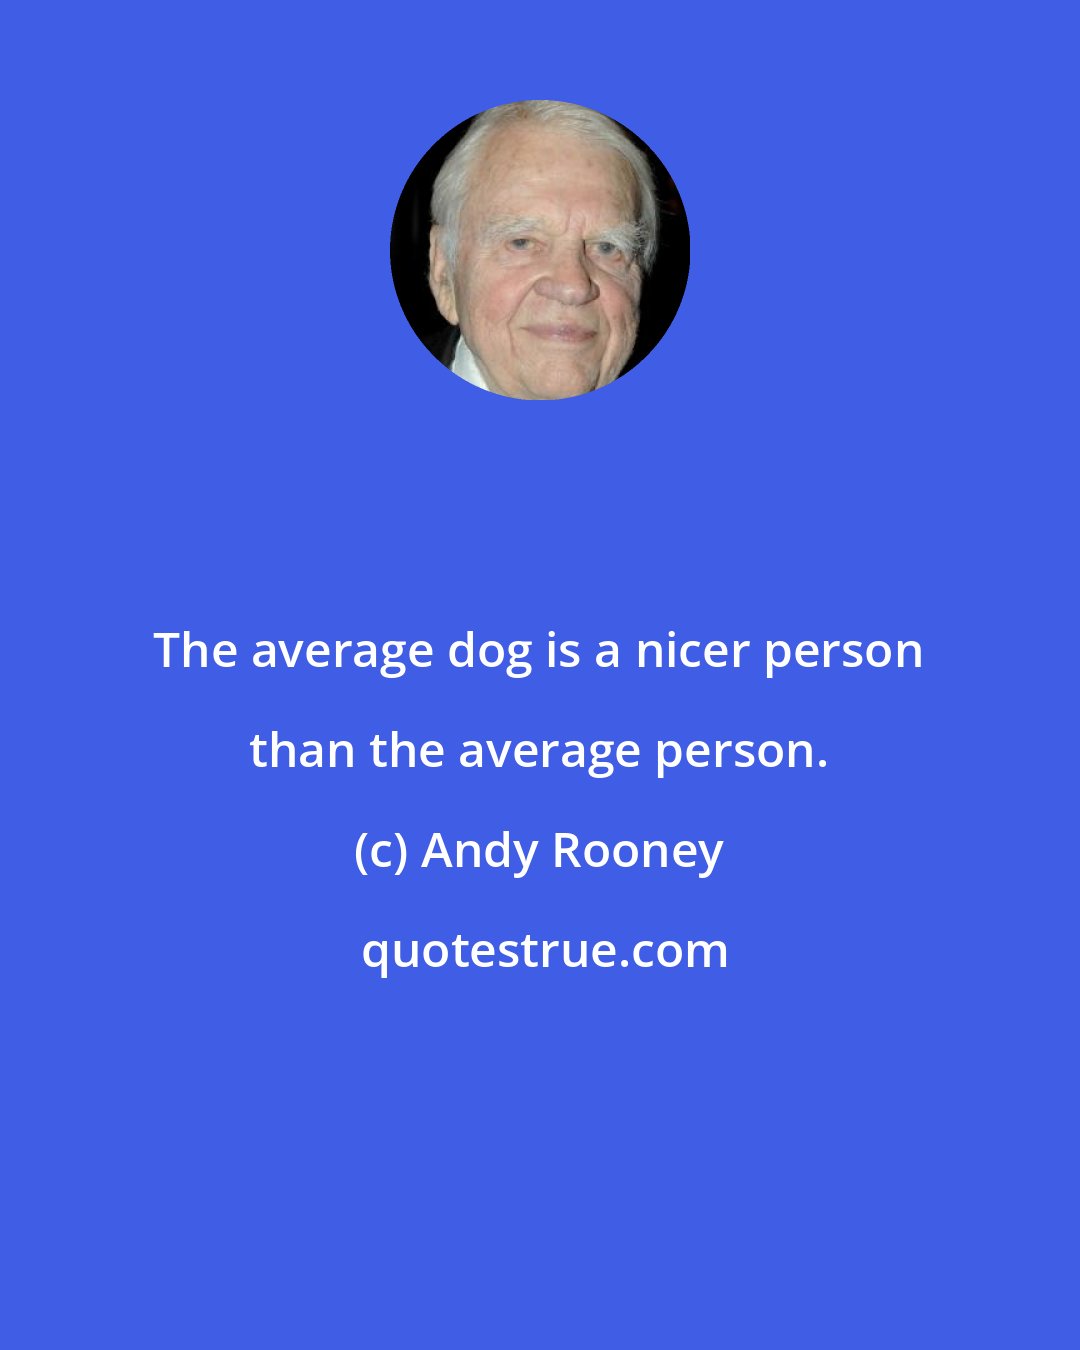 Andy Rooney: The average dog is a nicer person than the average person.